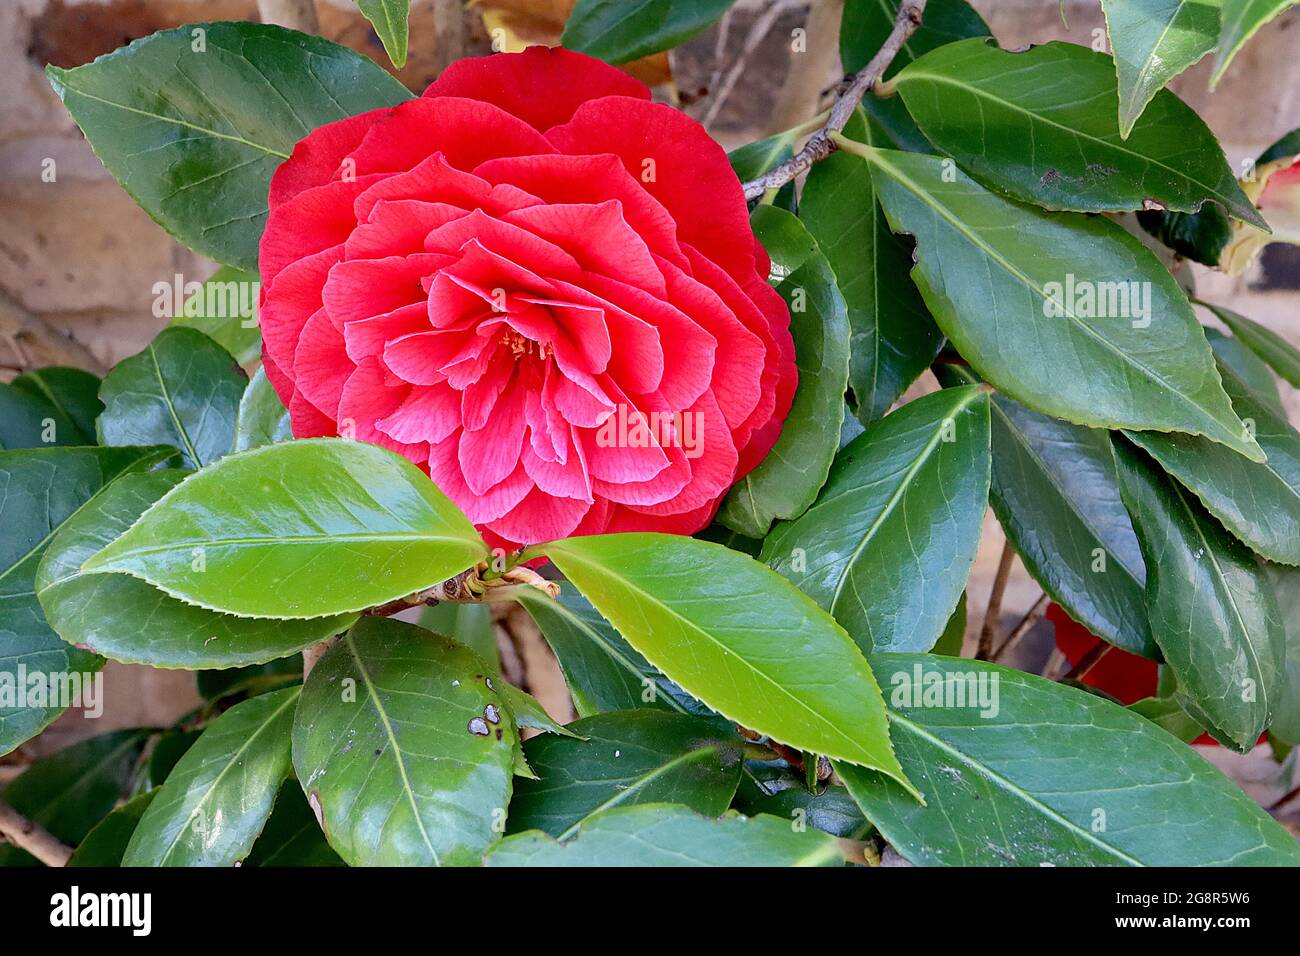 Camellia japonica ‘Eximia’ Japanese camellia Eximia – rose red formal double flowers with very fine white outlines,  May, England, UK Stock Photo